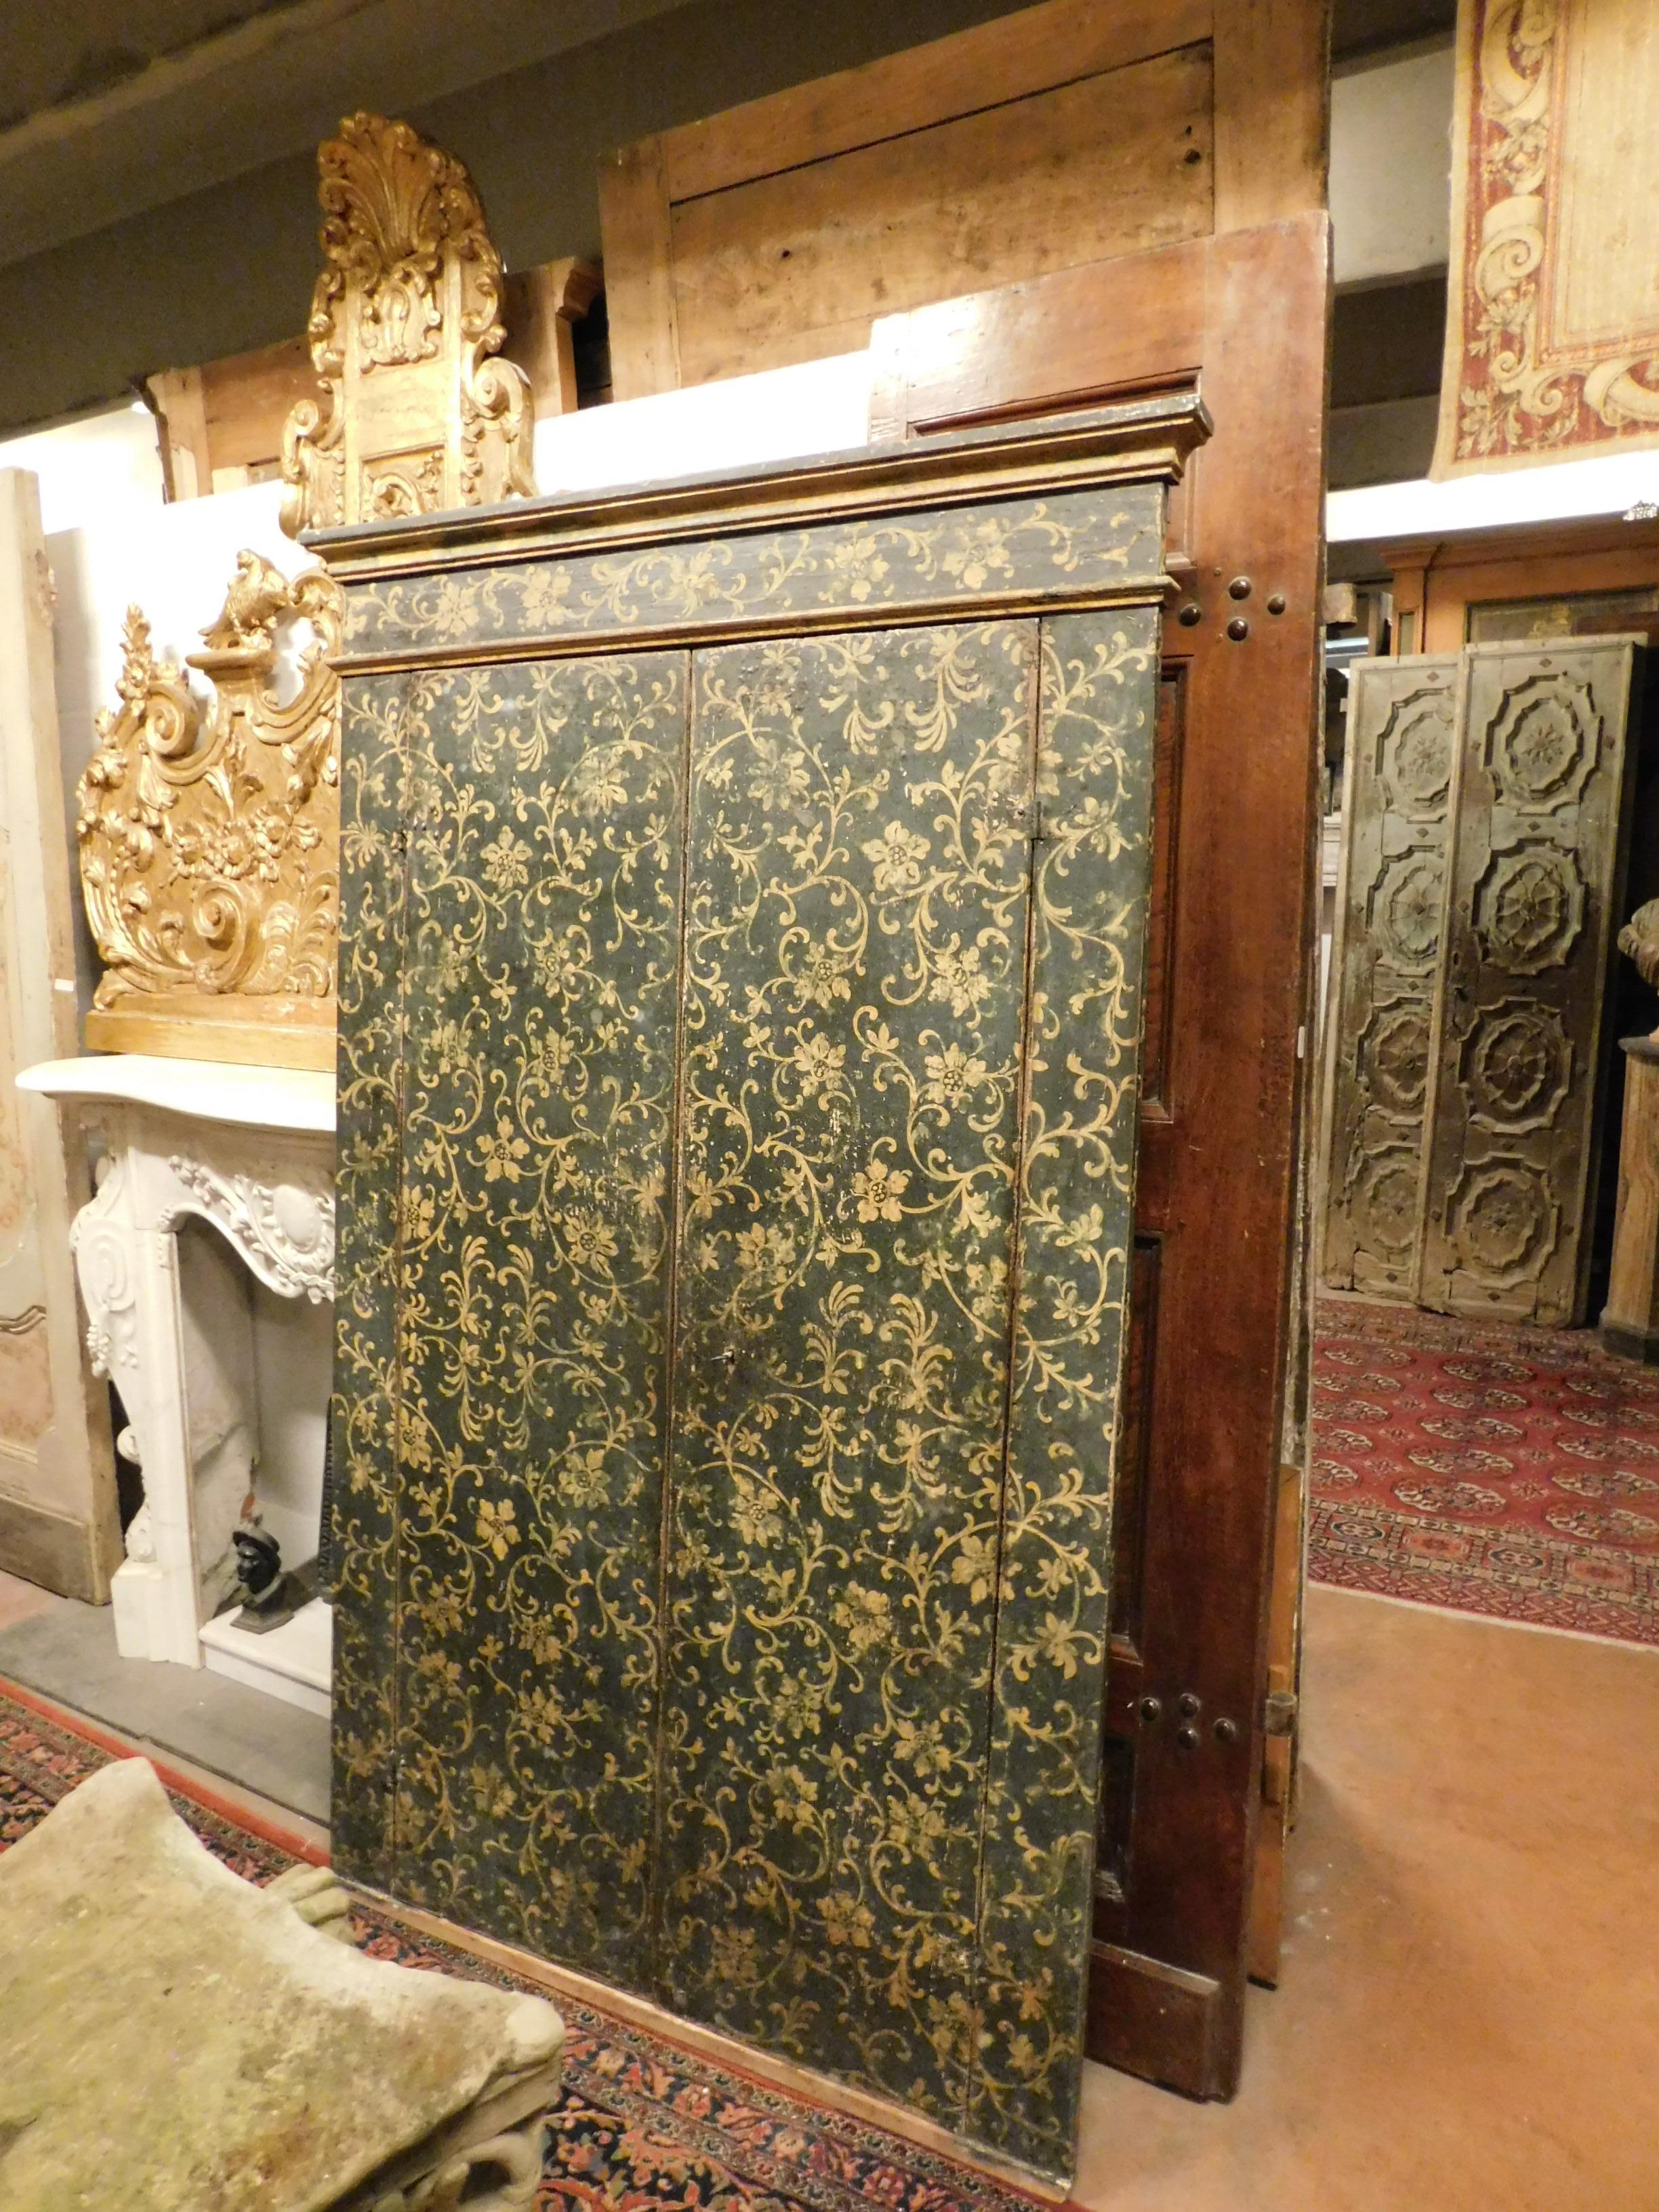 18th century antique lacquered placard with fake upholstery, meas. max cm 135 x h 214, doors to pull meas. 90 x 192 cm, age '700, from Italian house.